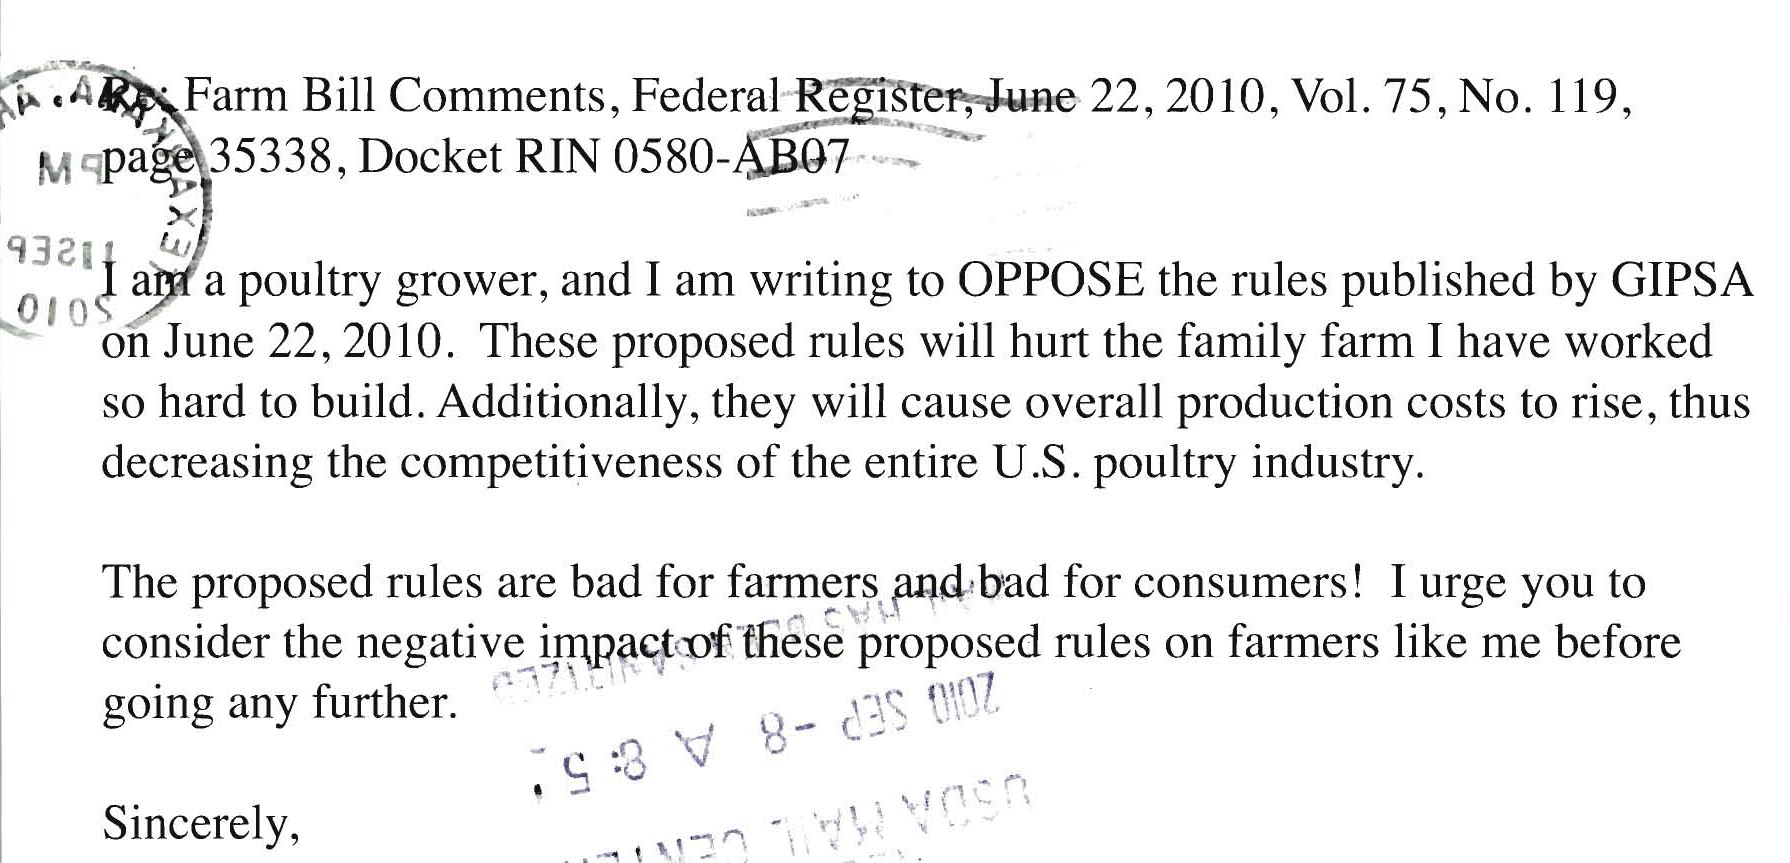 An image of a farm bill comment from June 22, 2010.